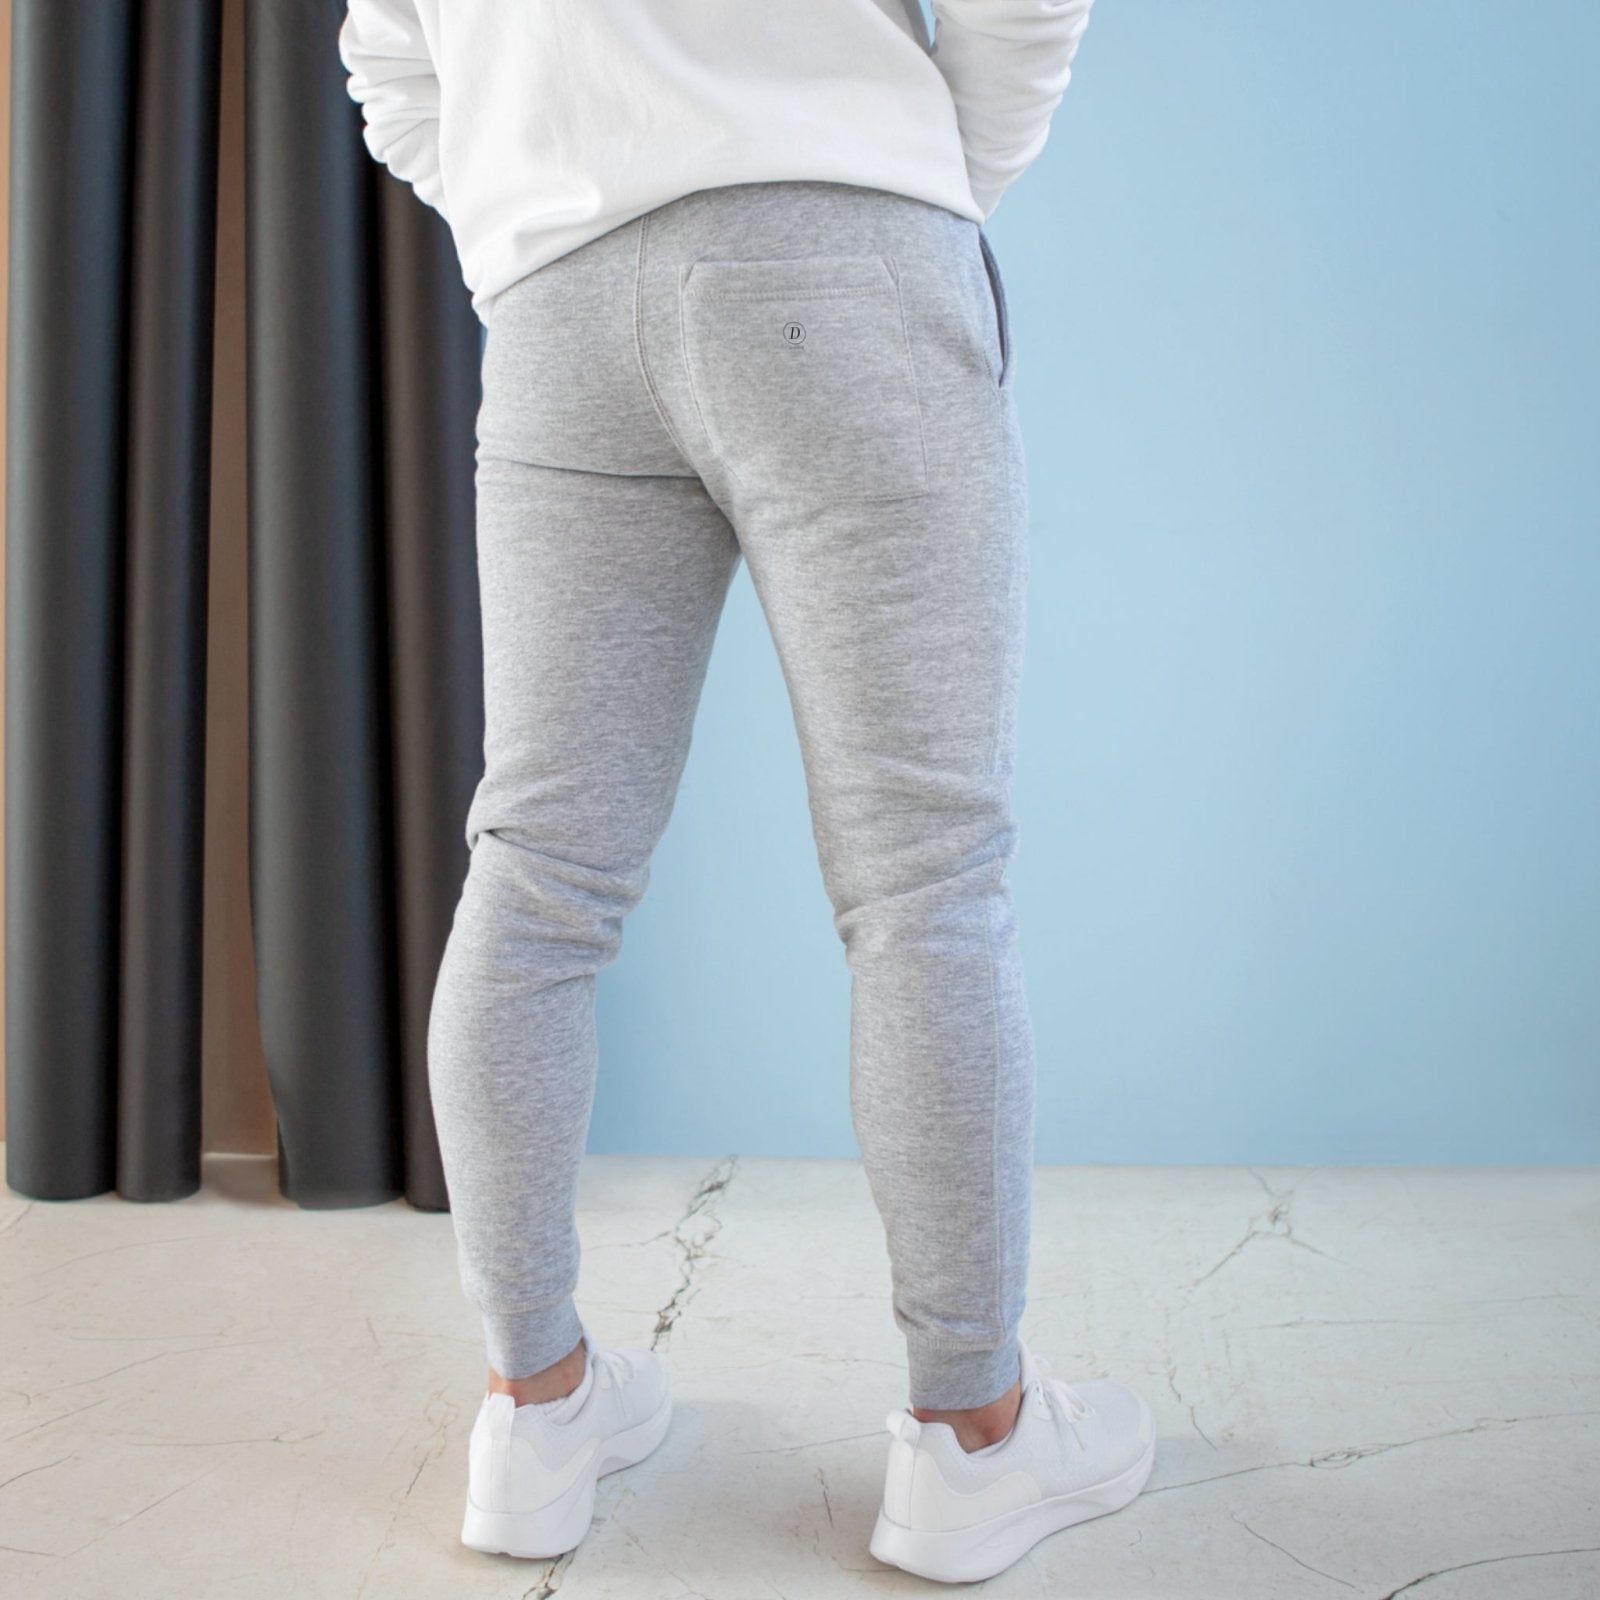 Dowding branded Joggers